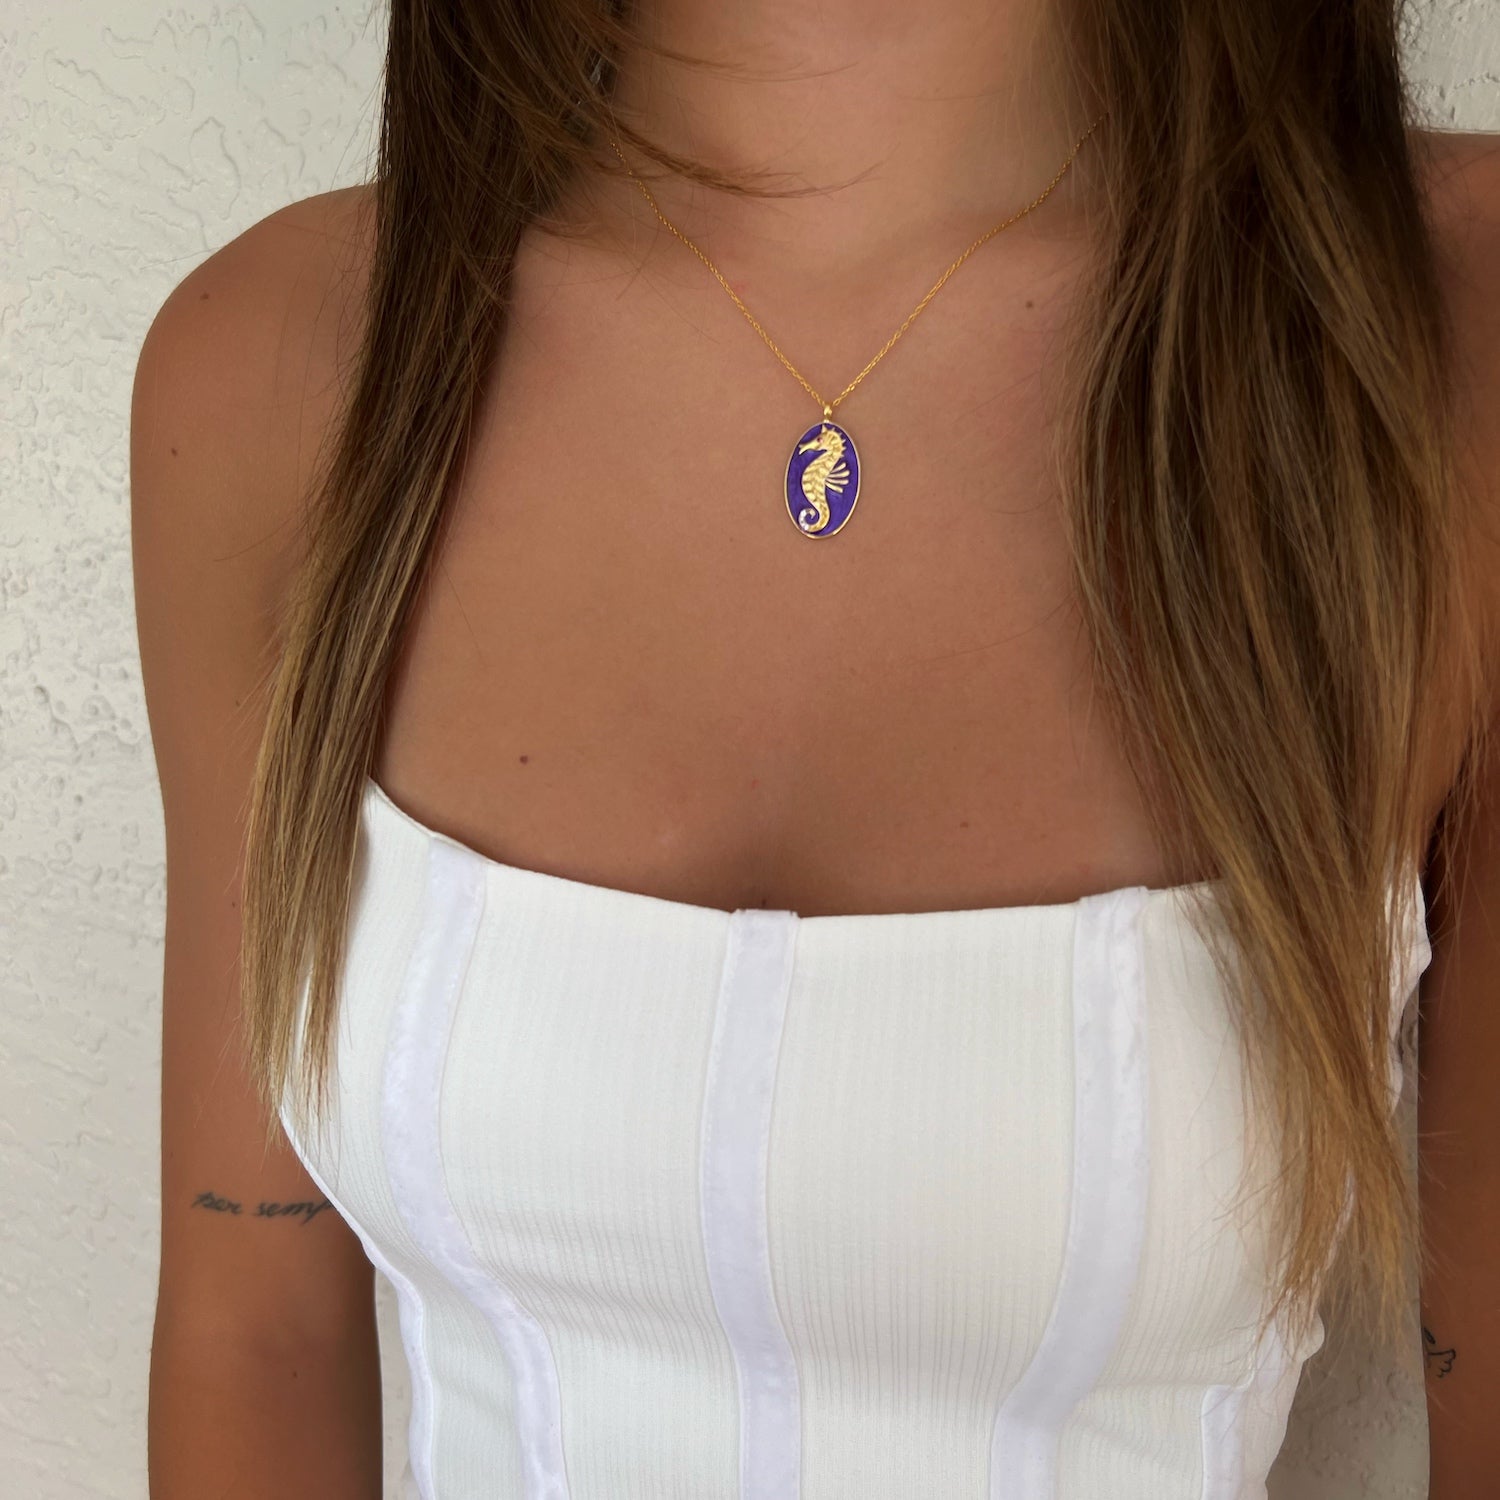 The Spirit Animal Seahorse Necklace elegantly adorning the neck of a model, adding a touch of enchantment to their ensemble.